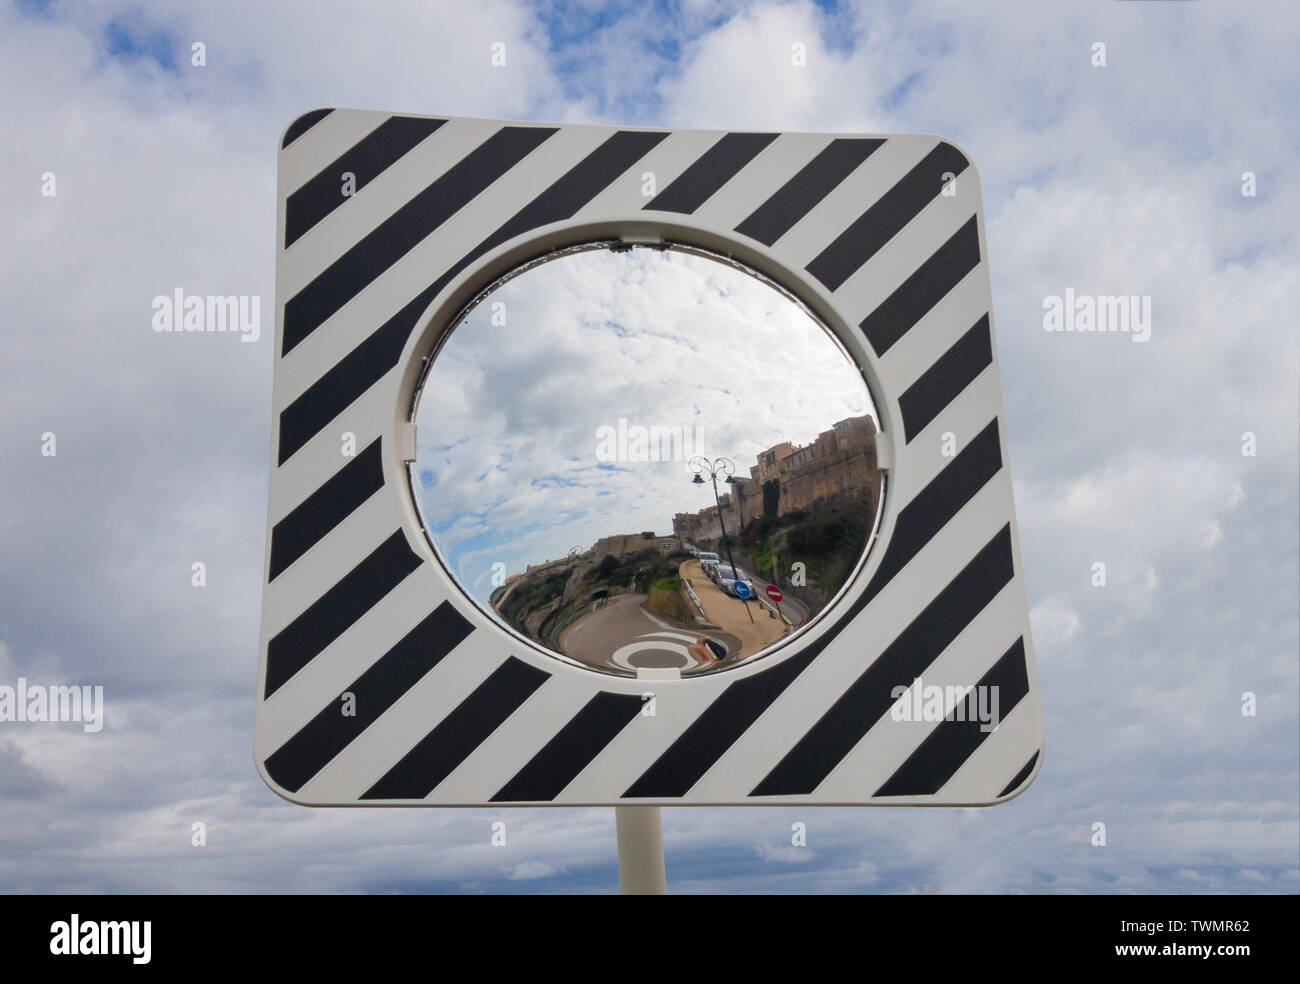 Round road mirror against the cloudy sky. Stock Photo